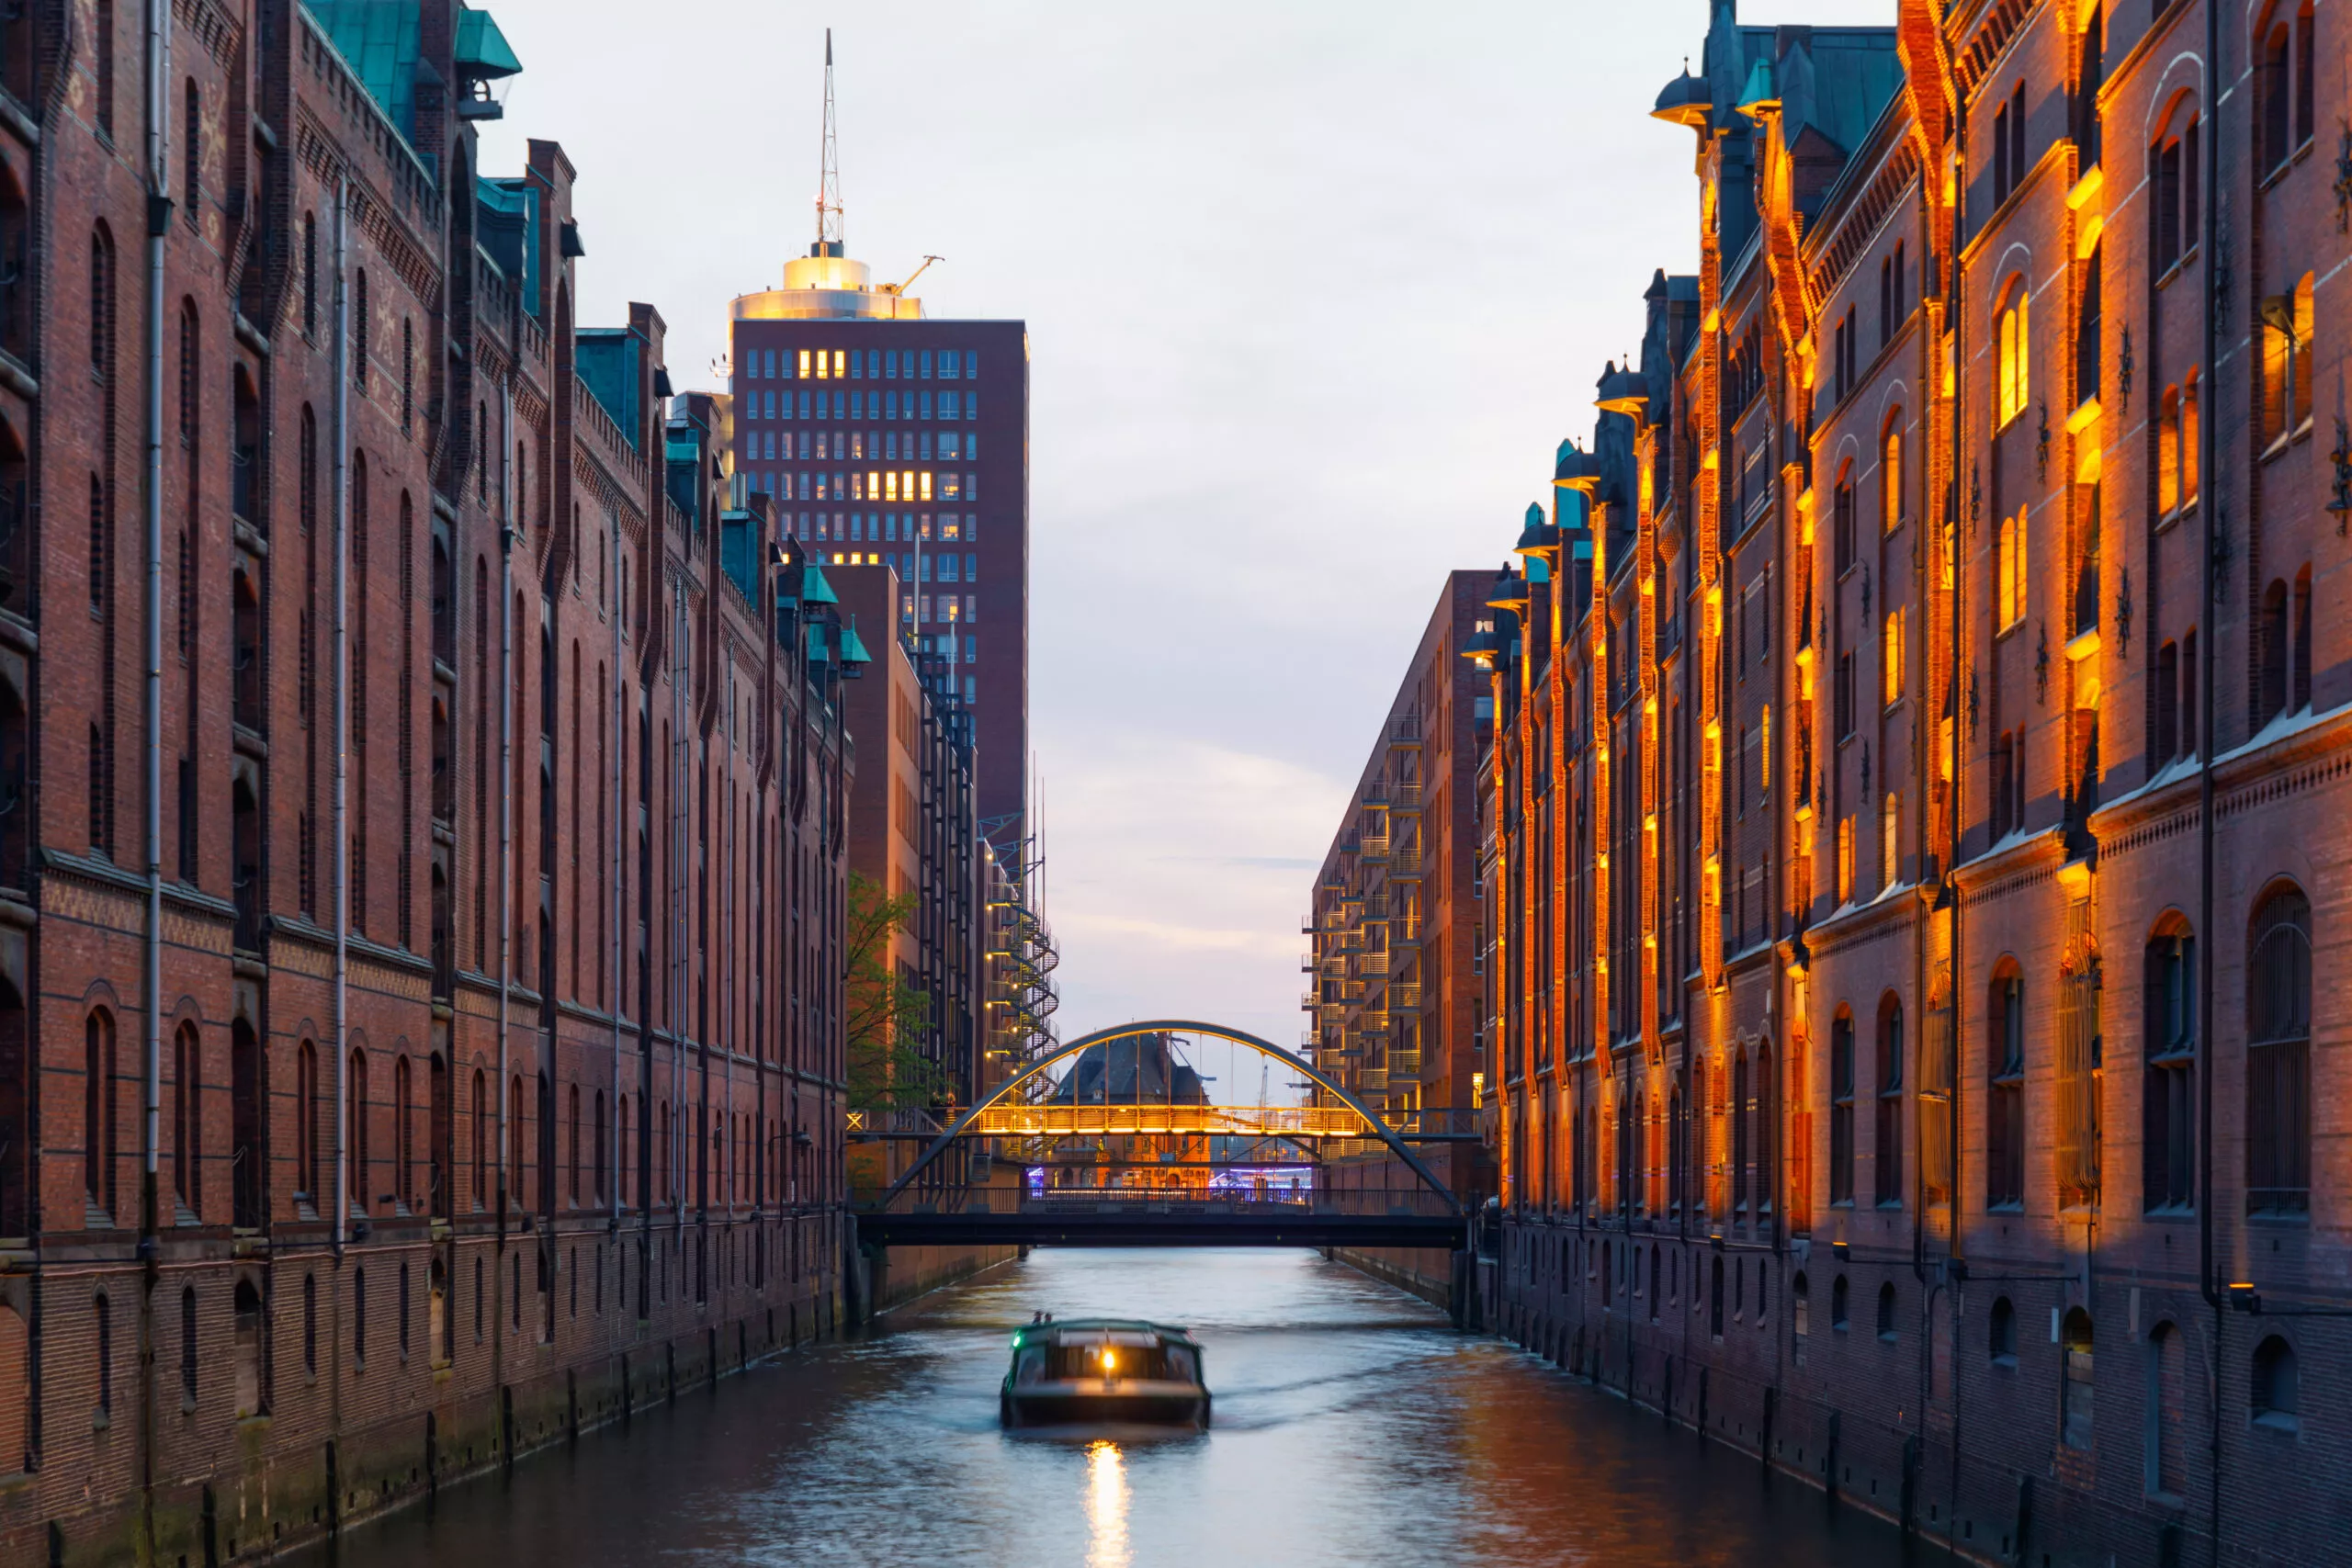 Boat in canal at historic Harbor Speicherstadt in Hamburg at sunset